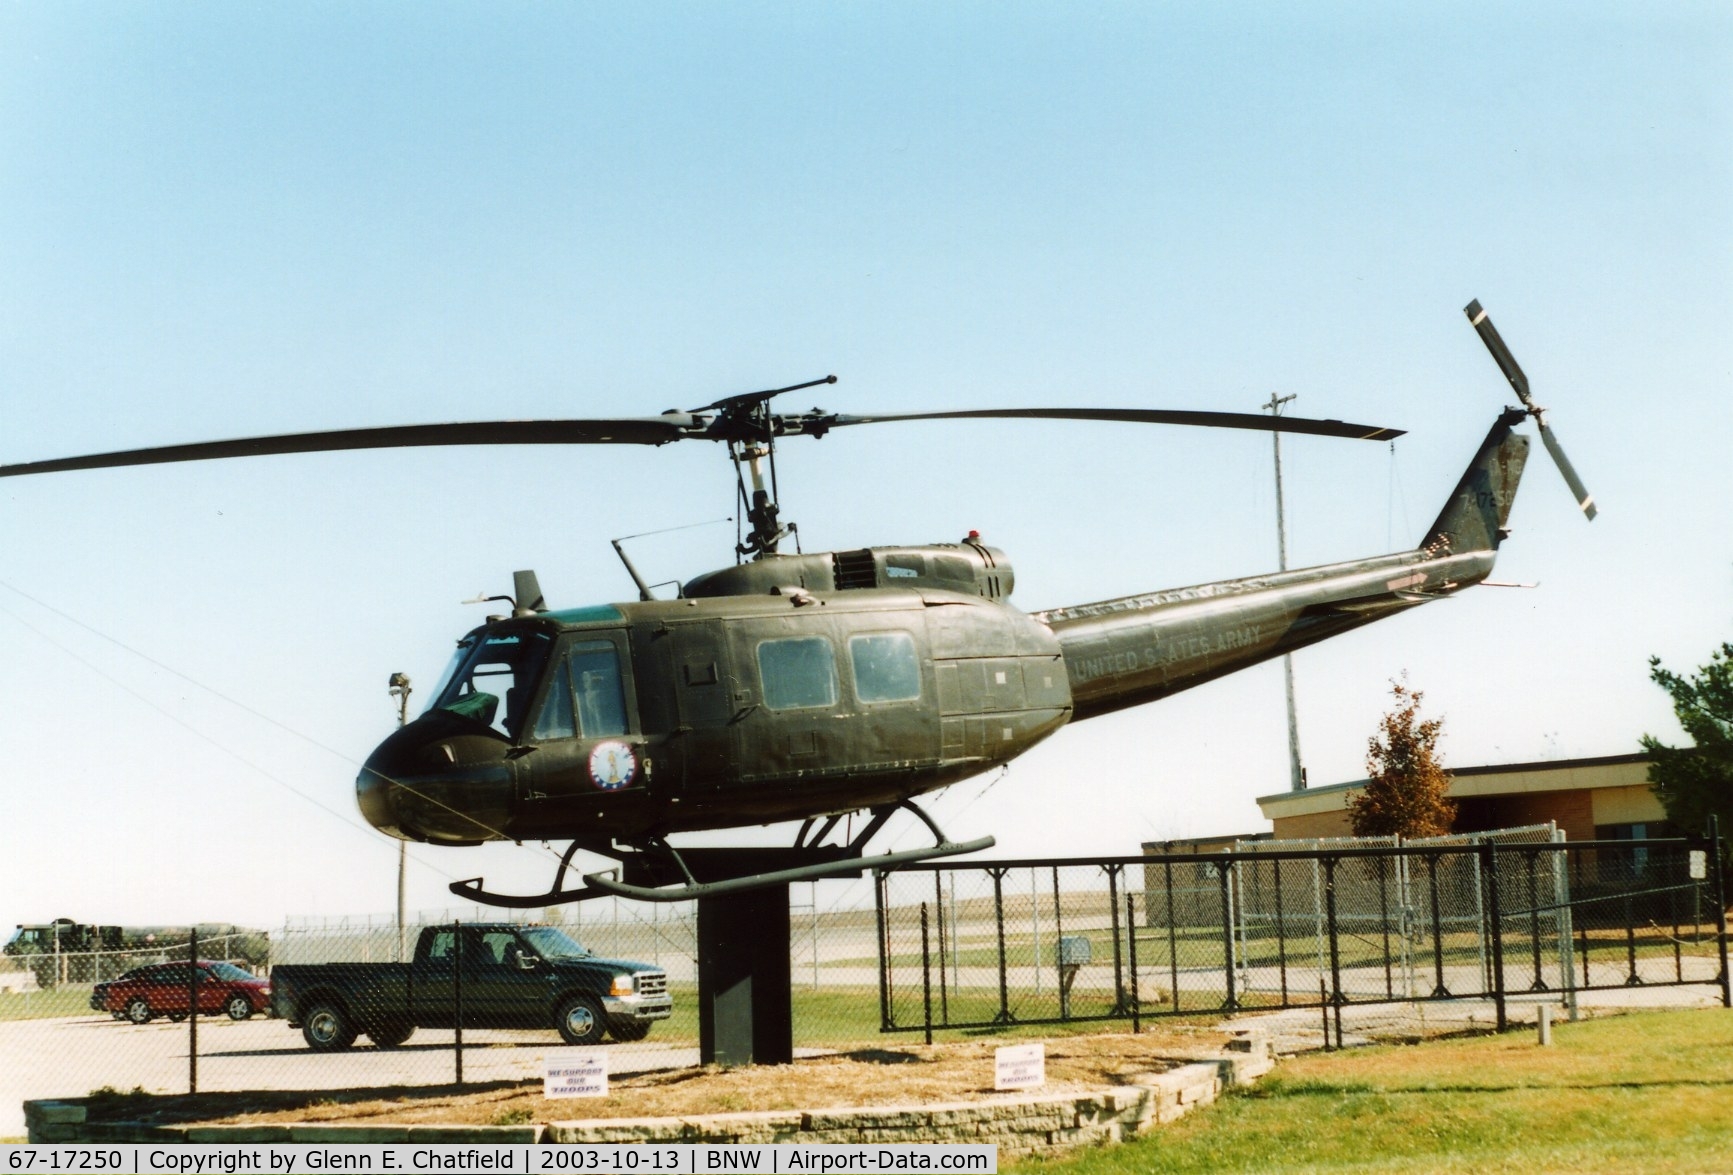 67-17250, 1967 Bell UH-1H Iroquois C/N 9448, UH-1H gate guardian for the Army National Guard